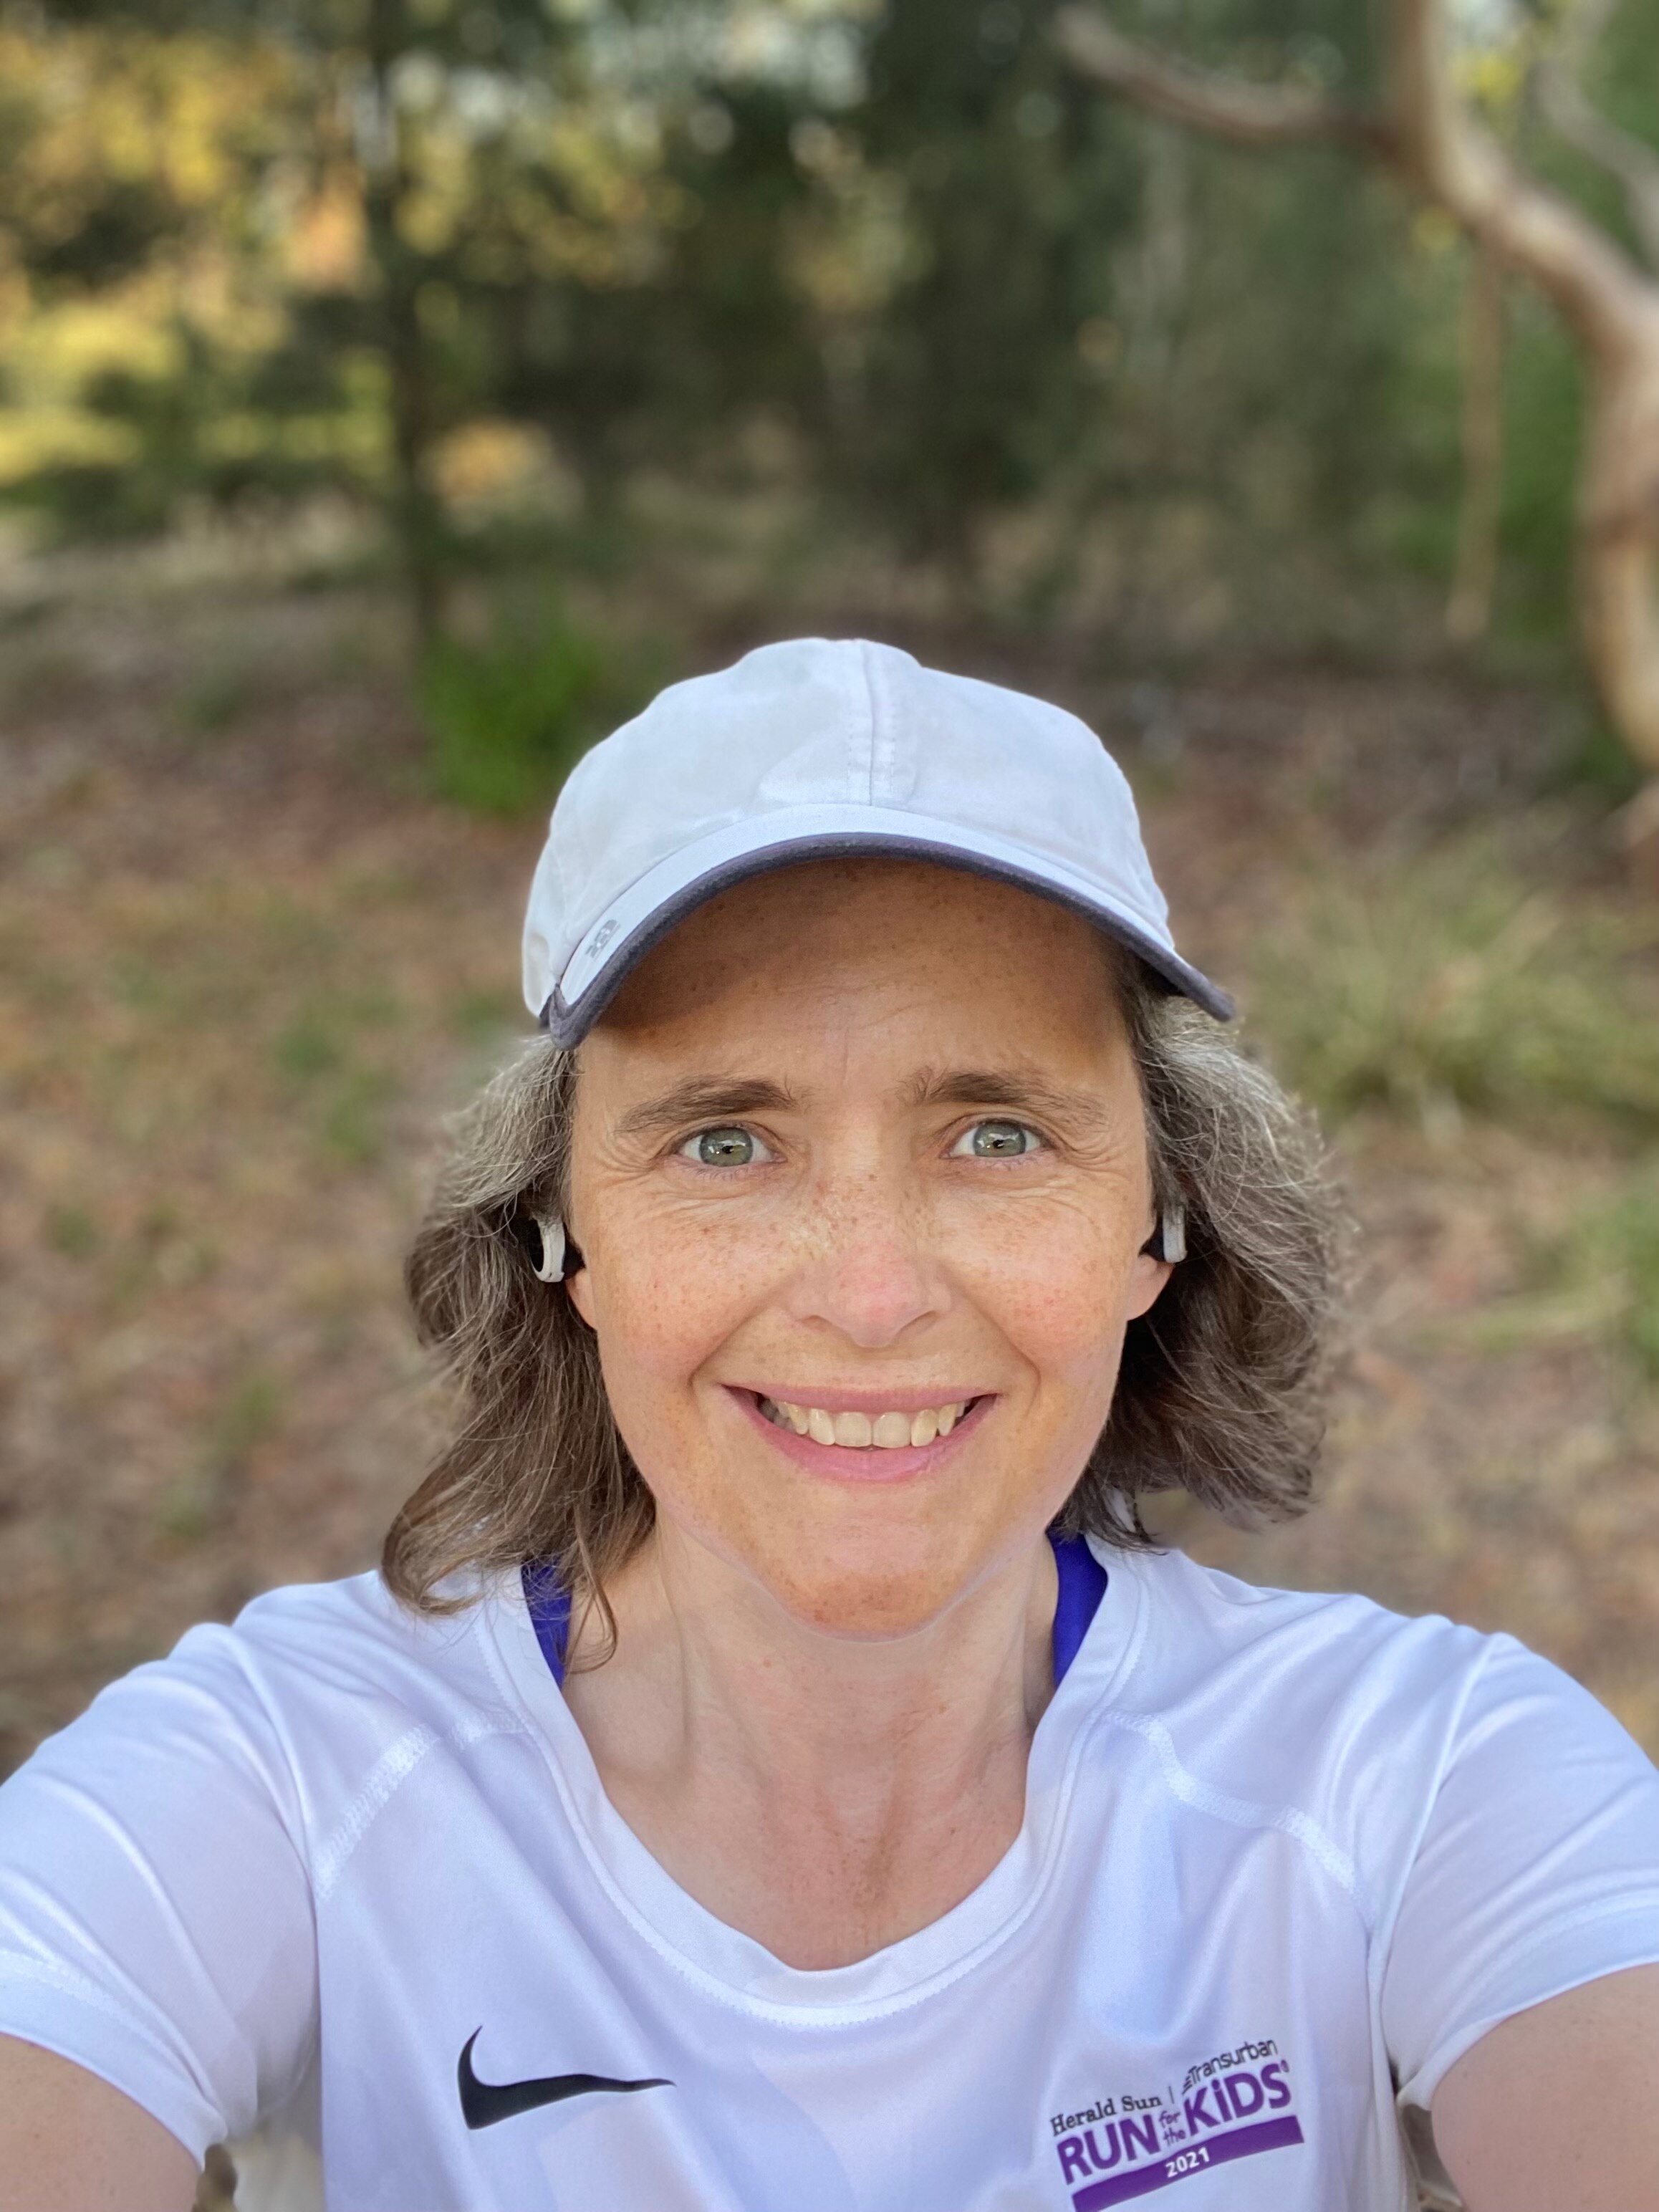 Selfie of a middle-aged woman in white cap and tshirt, stopping mid-run to smile.